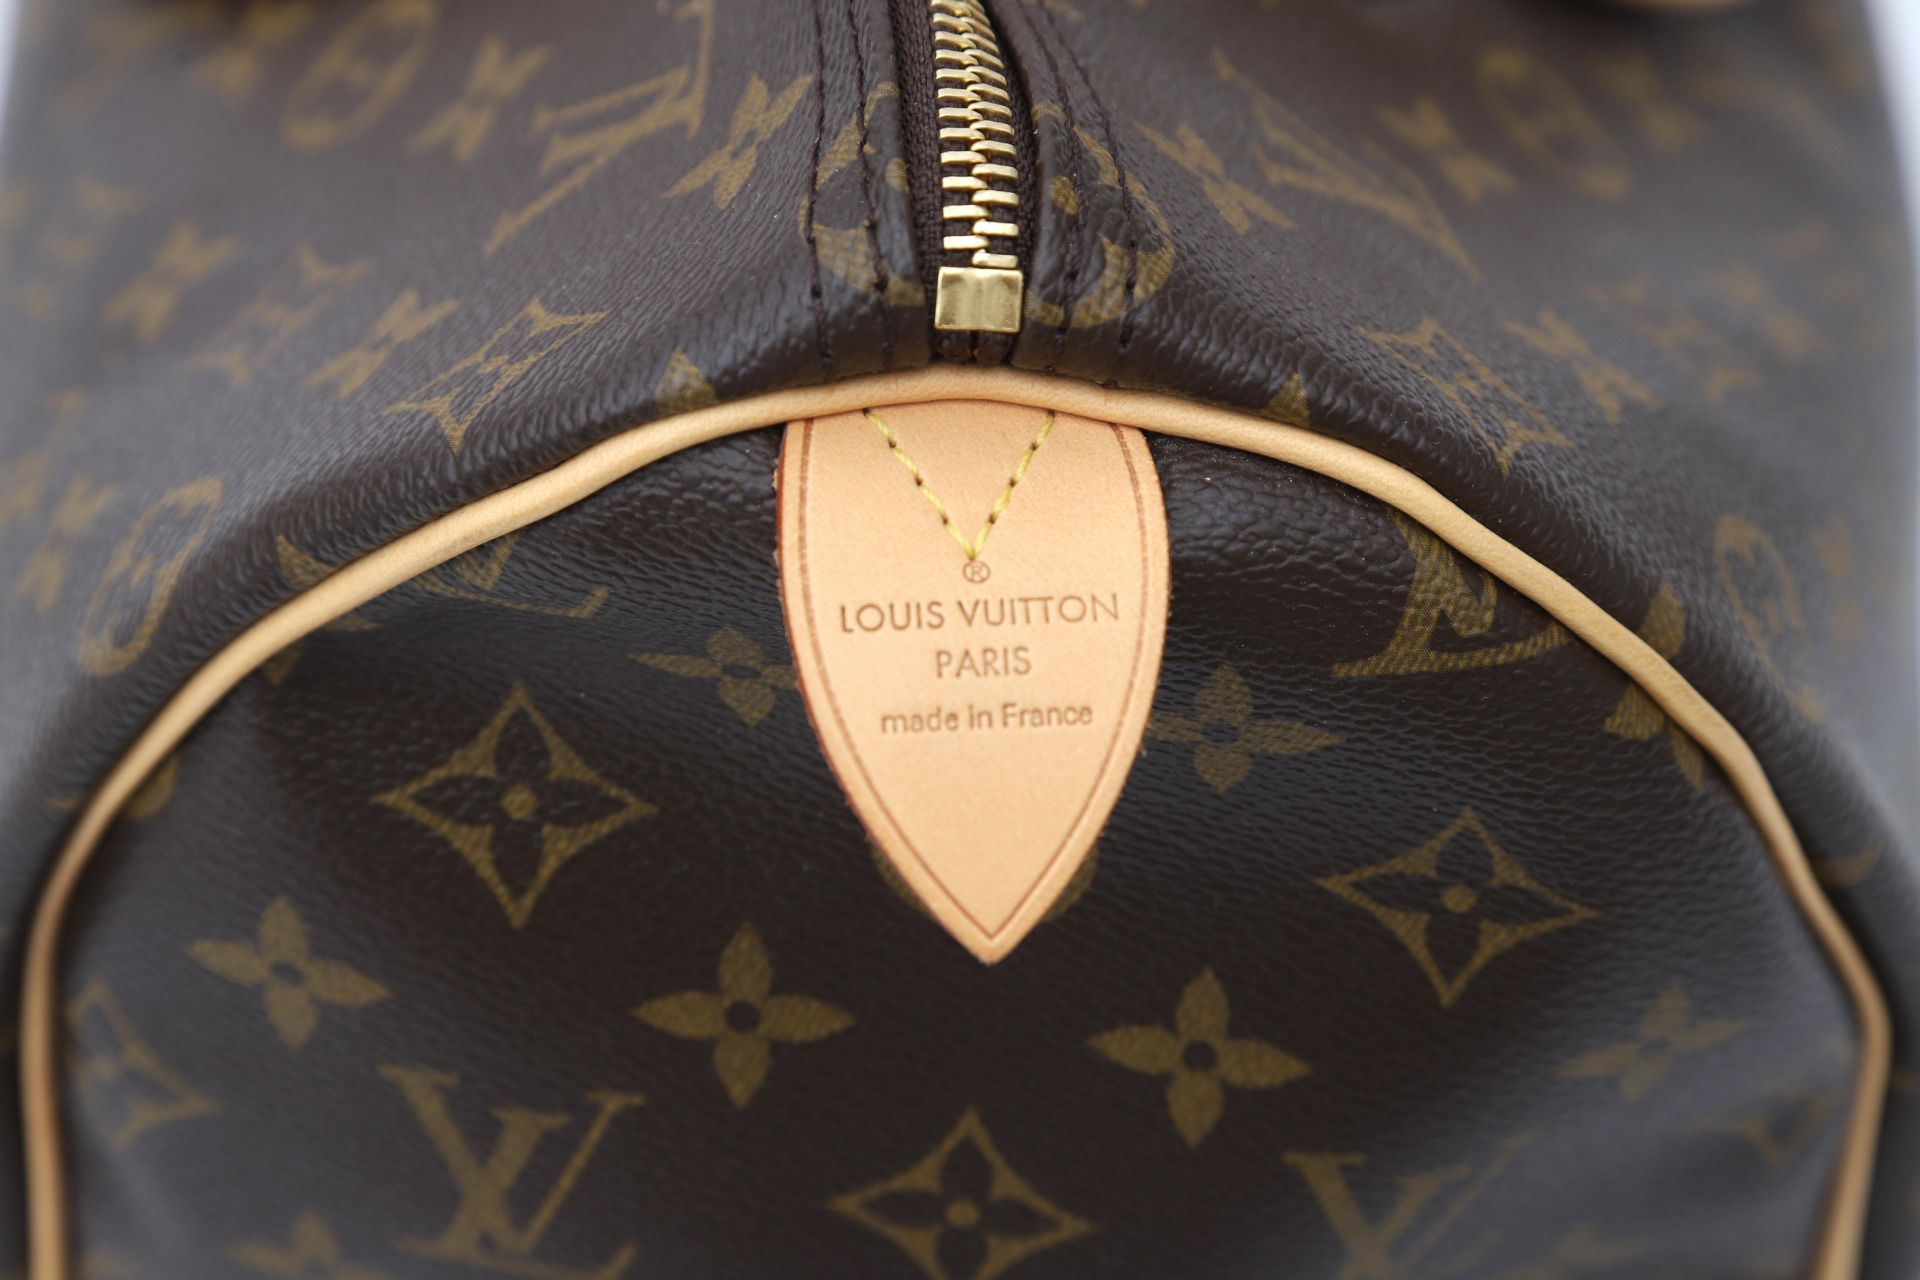 Vintage bag by Louis Vuitton model, Speedy 30 - Image 4 of 11